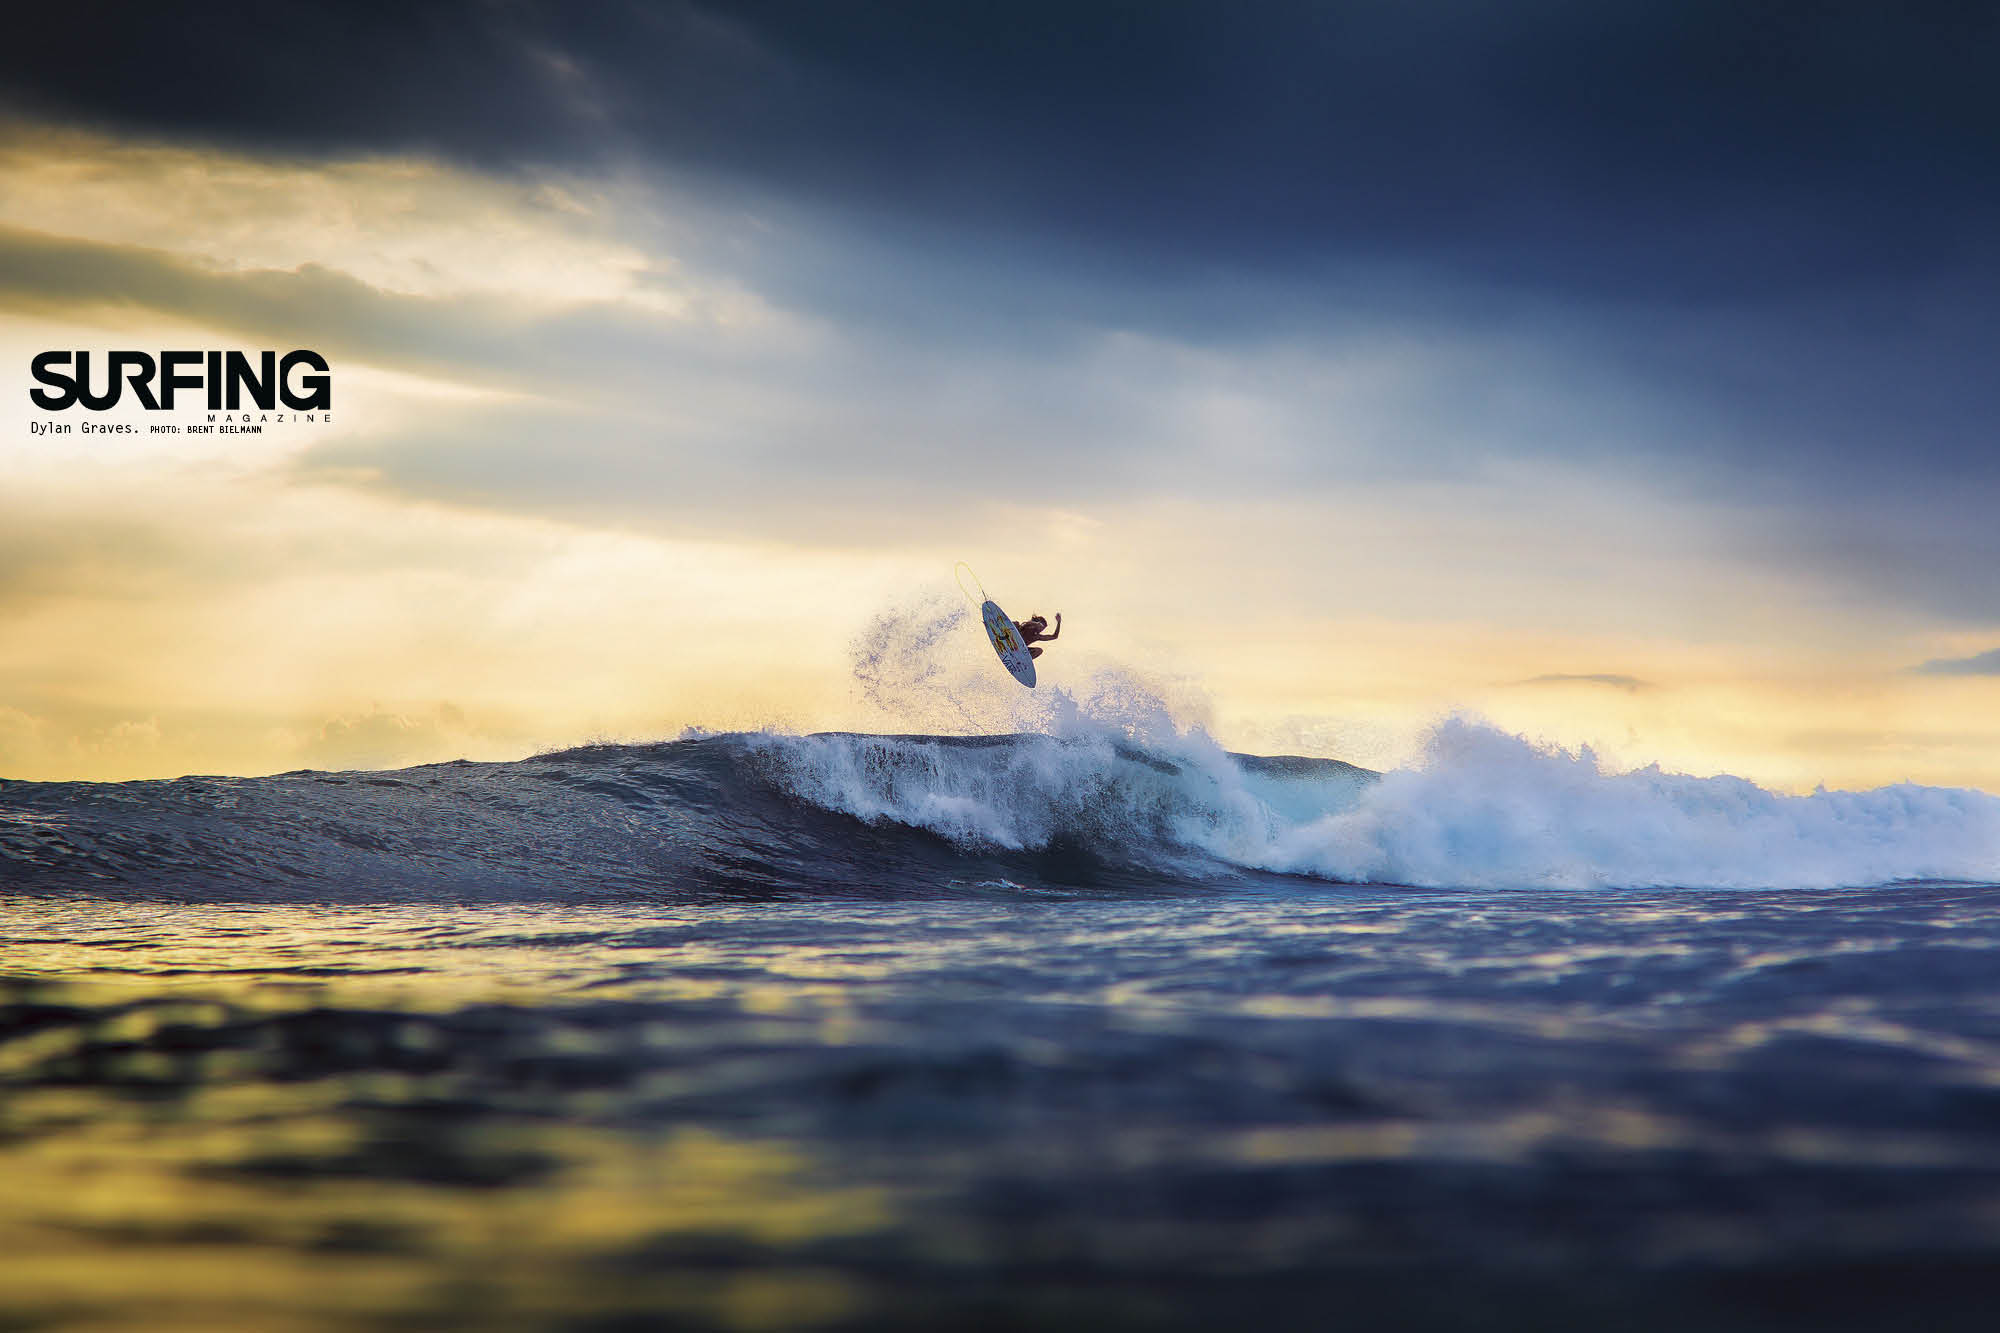 Surfing magazine wallpapers